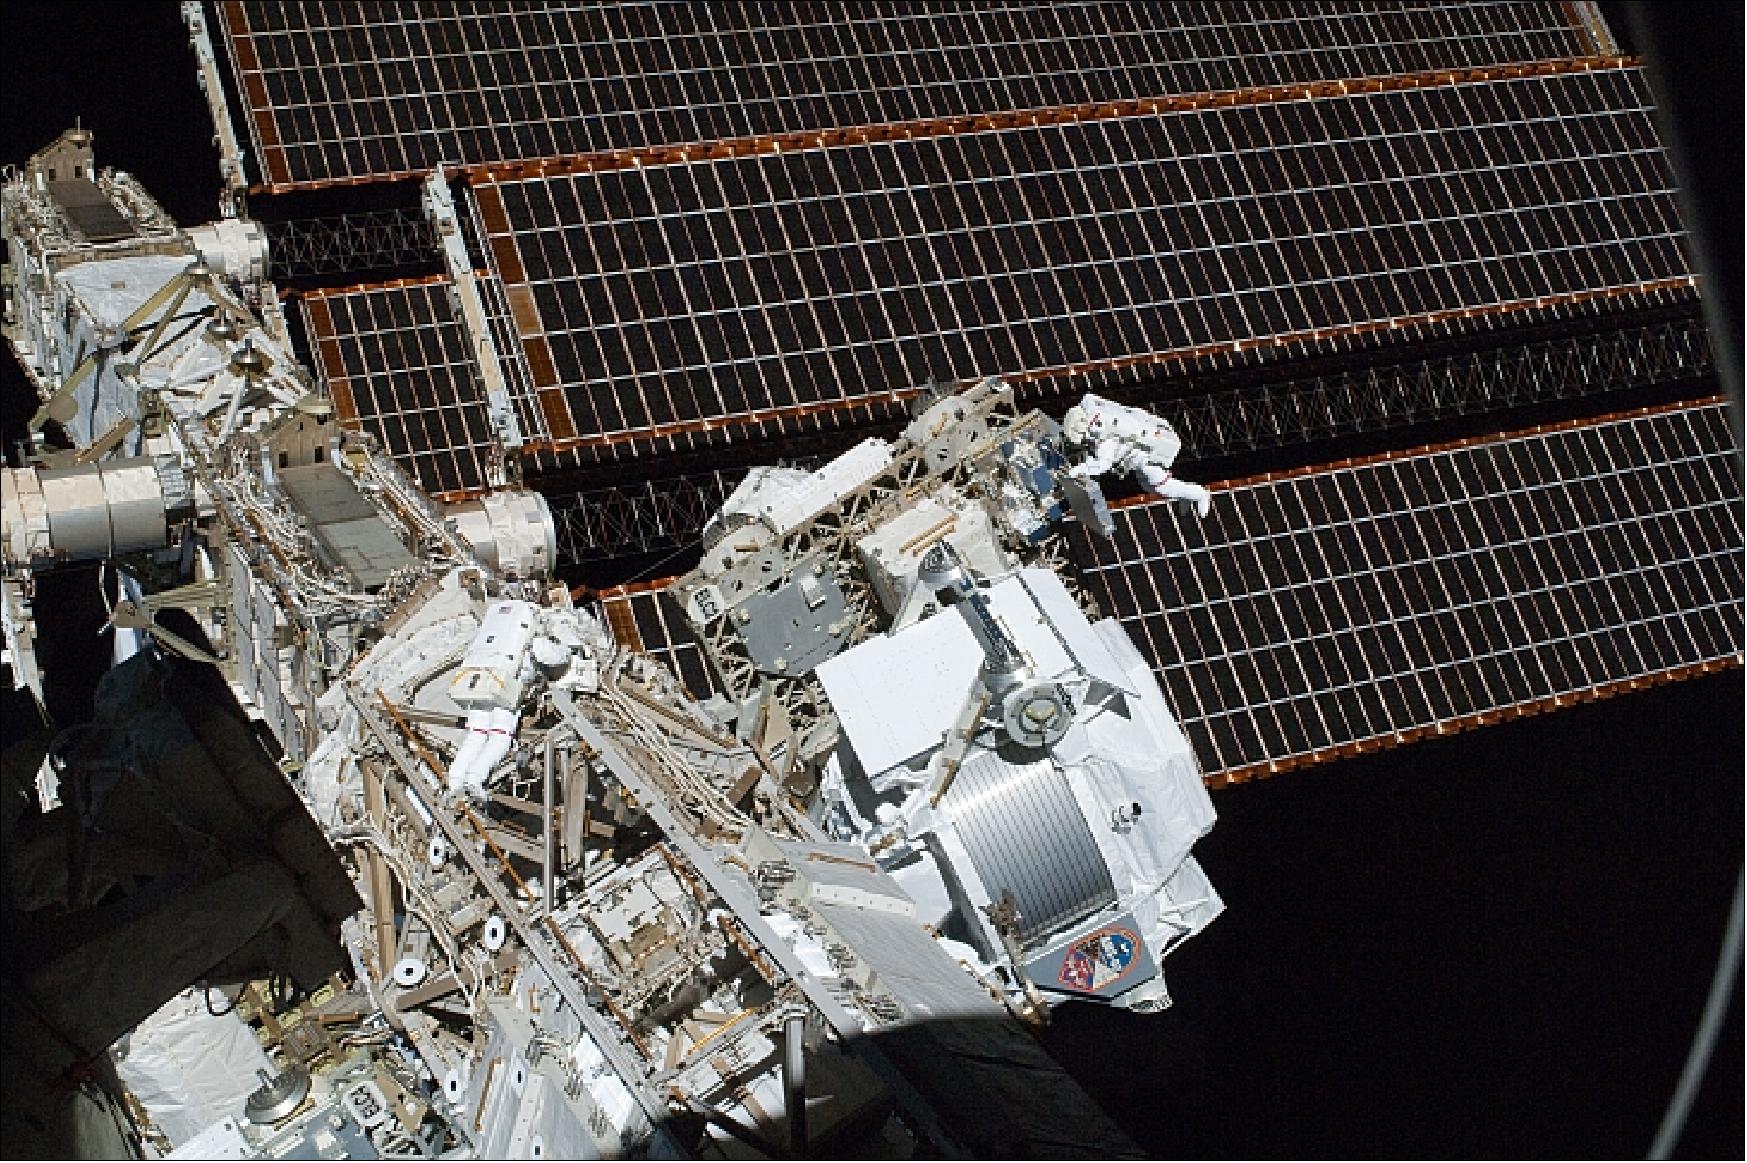 Figure 33: Photo of the installed AMS-02 with astronauts Andrew Feustel (right) and Greg Chamitoff (left middle on the truss) during a 6 hr 19 min EVA on May 20, 2011, (image credit: NASA, ESA, Ref. 68)